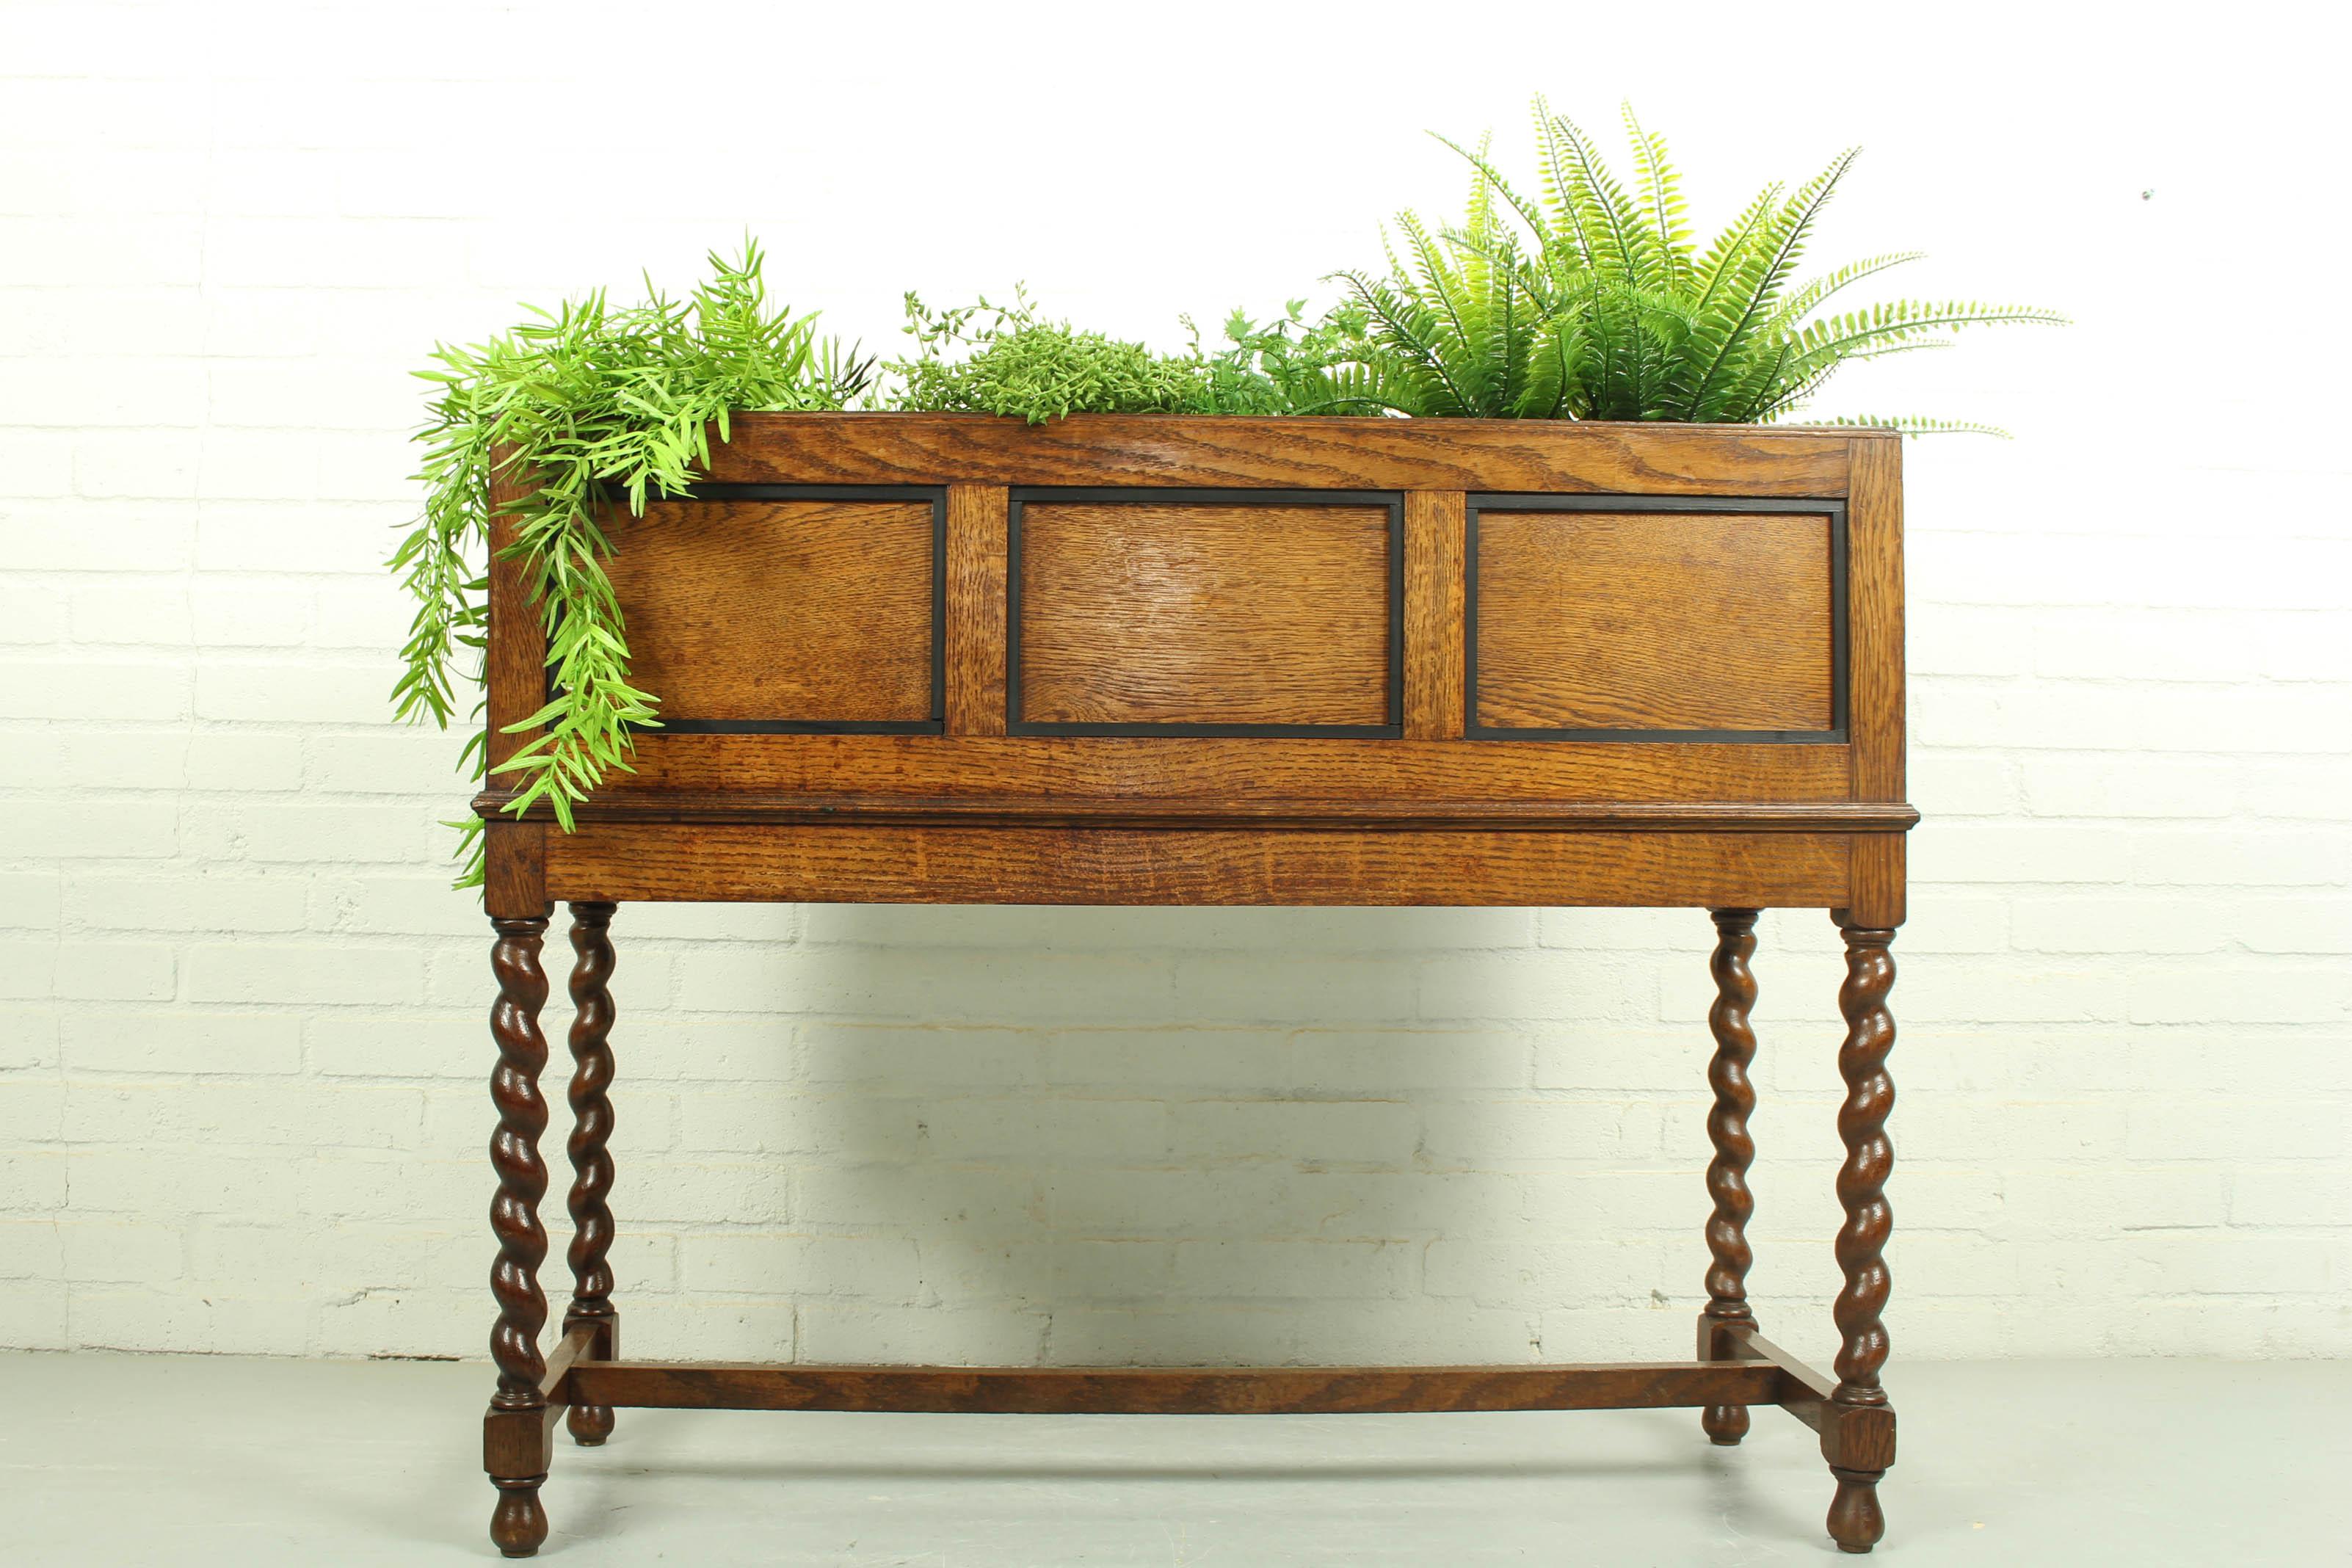 Antique oak Art Deco Jardinière/ Planter Box, 1920s. No inner box available, sturdy and stable and wood is in good condition. 

Dimensions: 75 cm H, 94 cm W and 34 cm D.
 